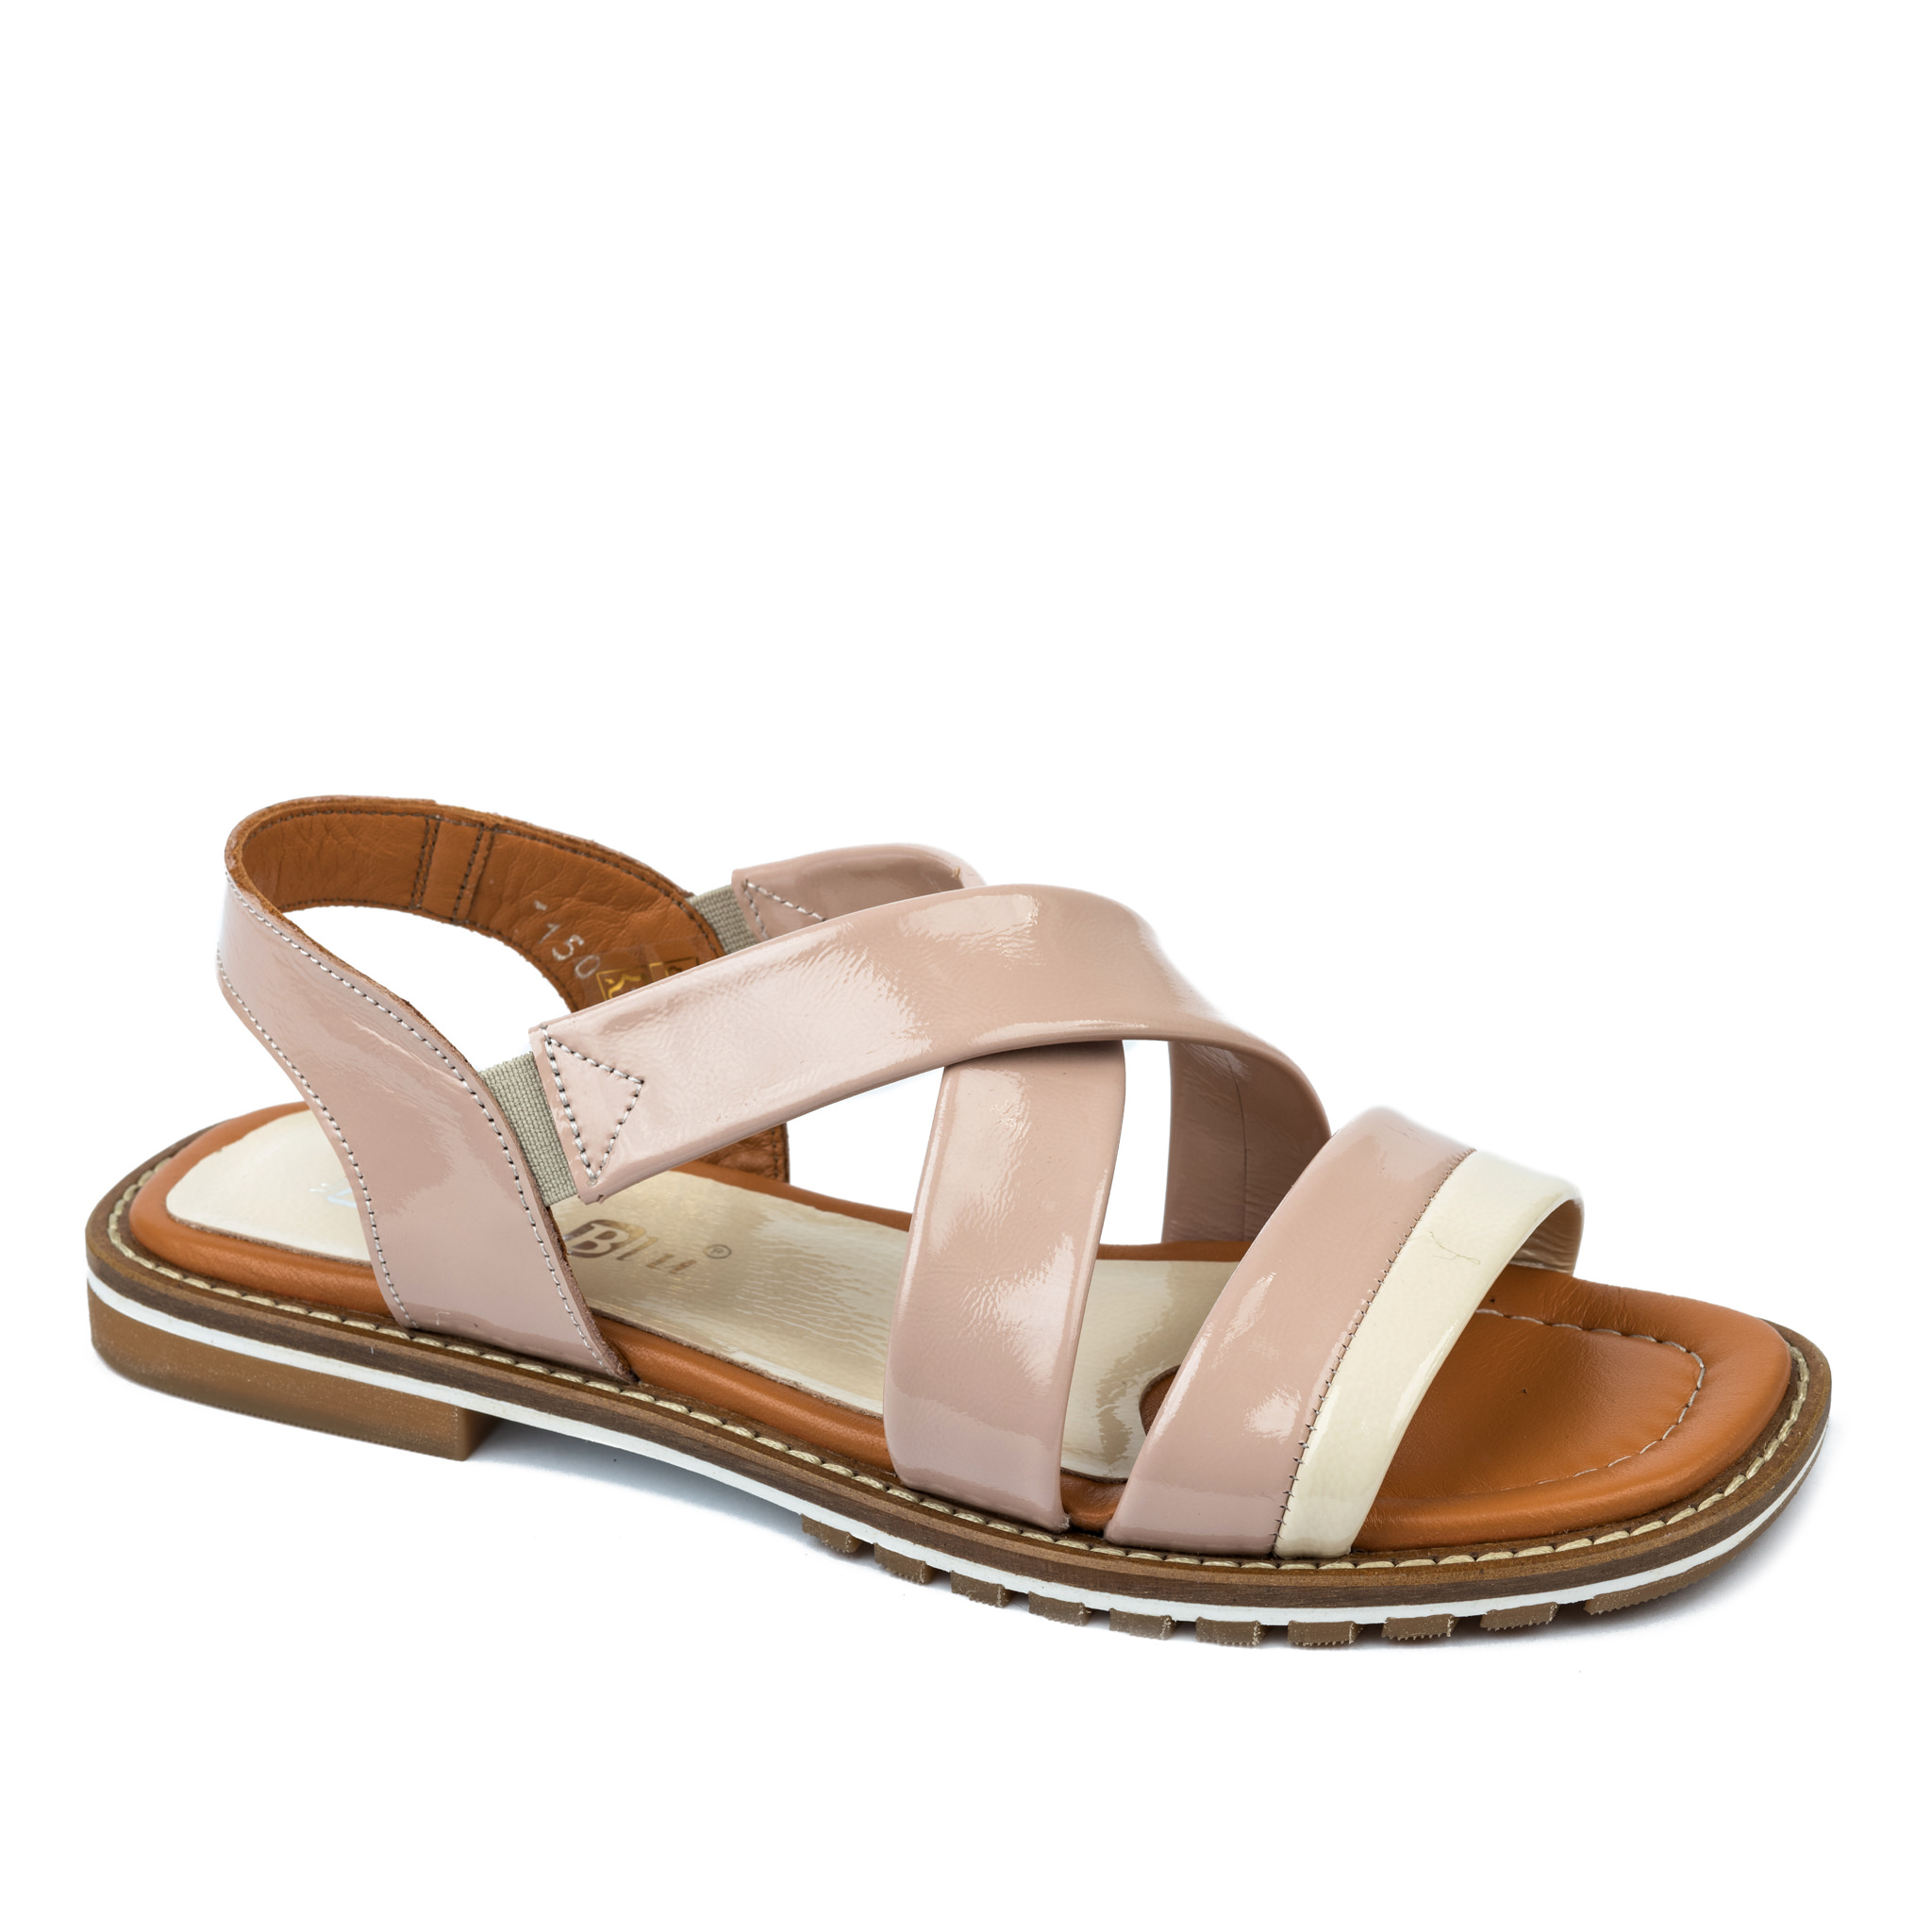 Leather sandals A646 - POWDER ROSE